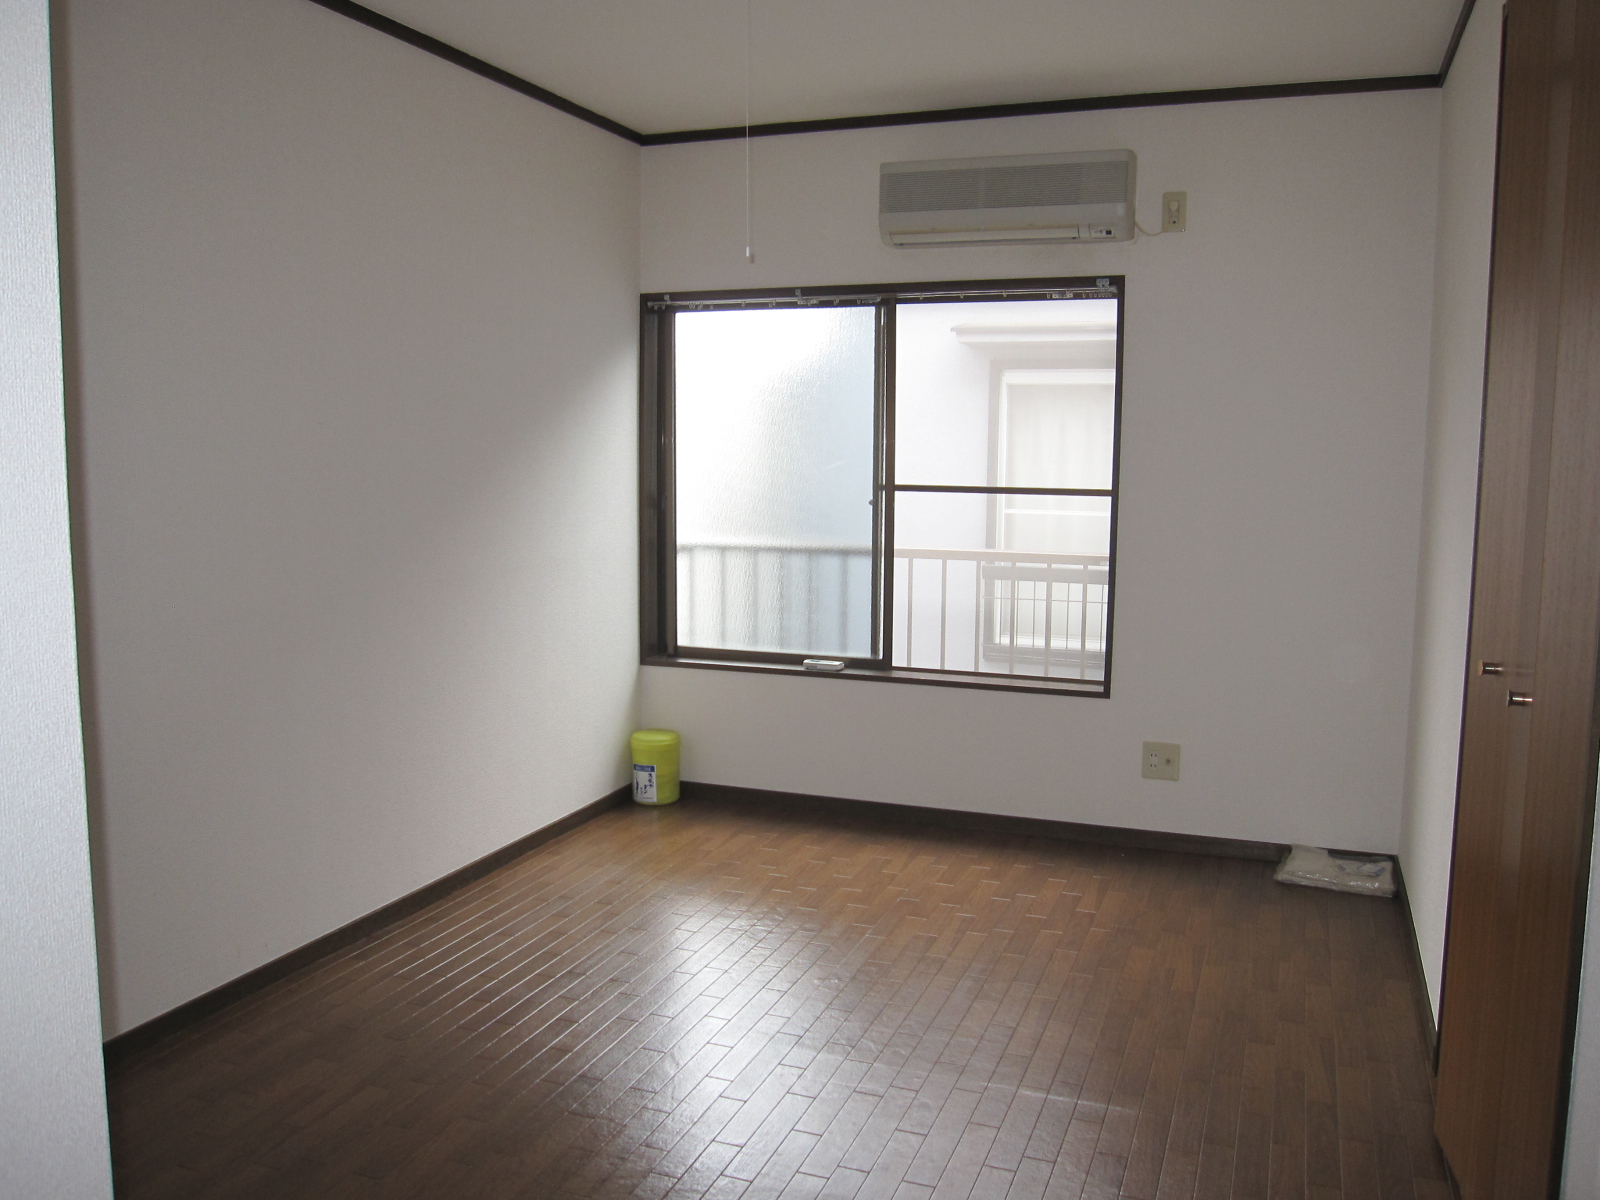 Living and room. Flooring, Air-conditioned